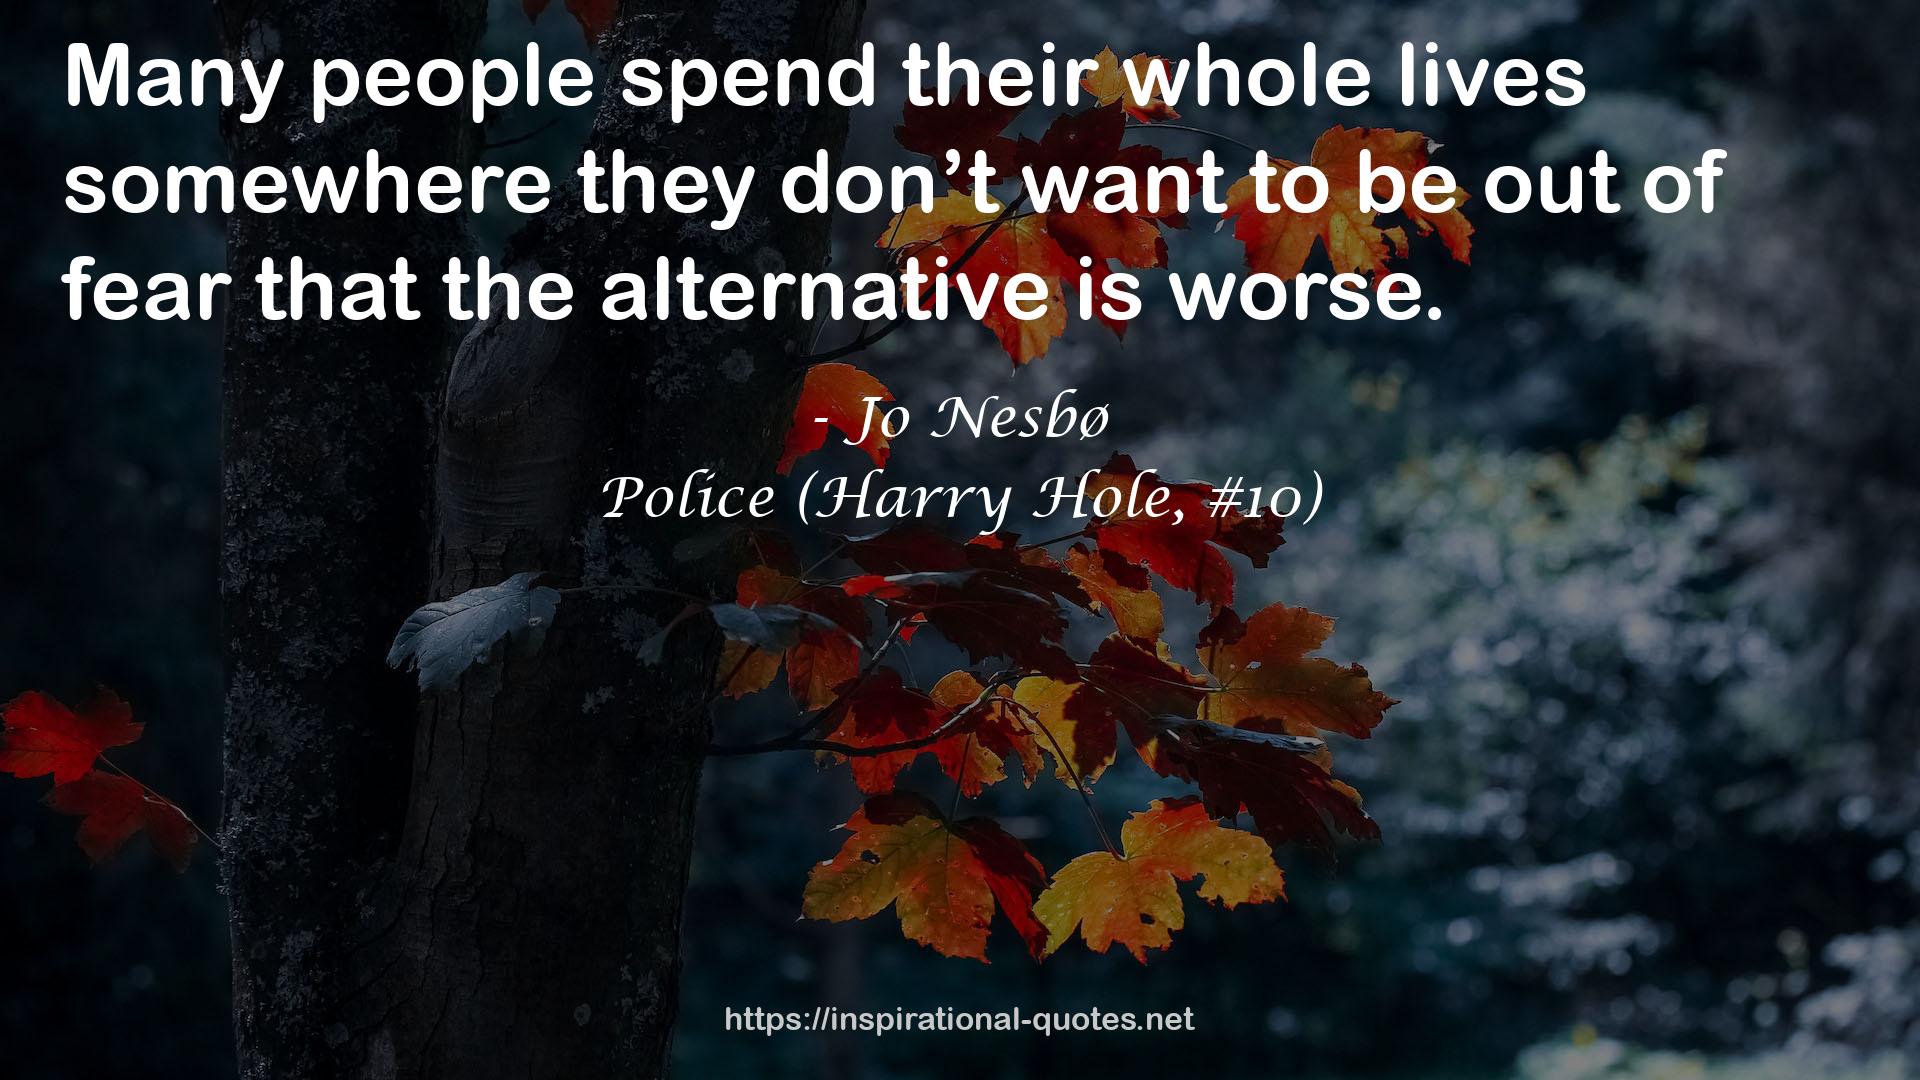 Police (Harry Hole, #10) QUOTES